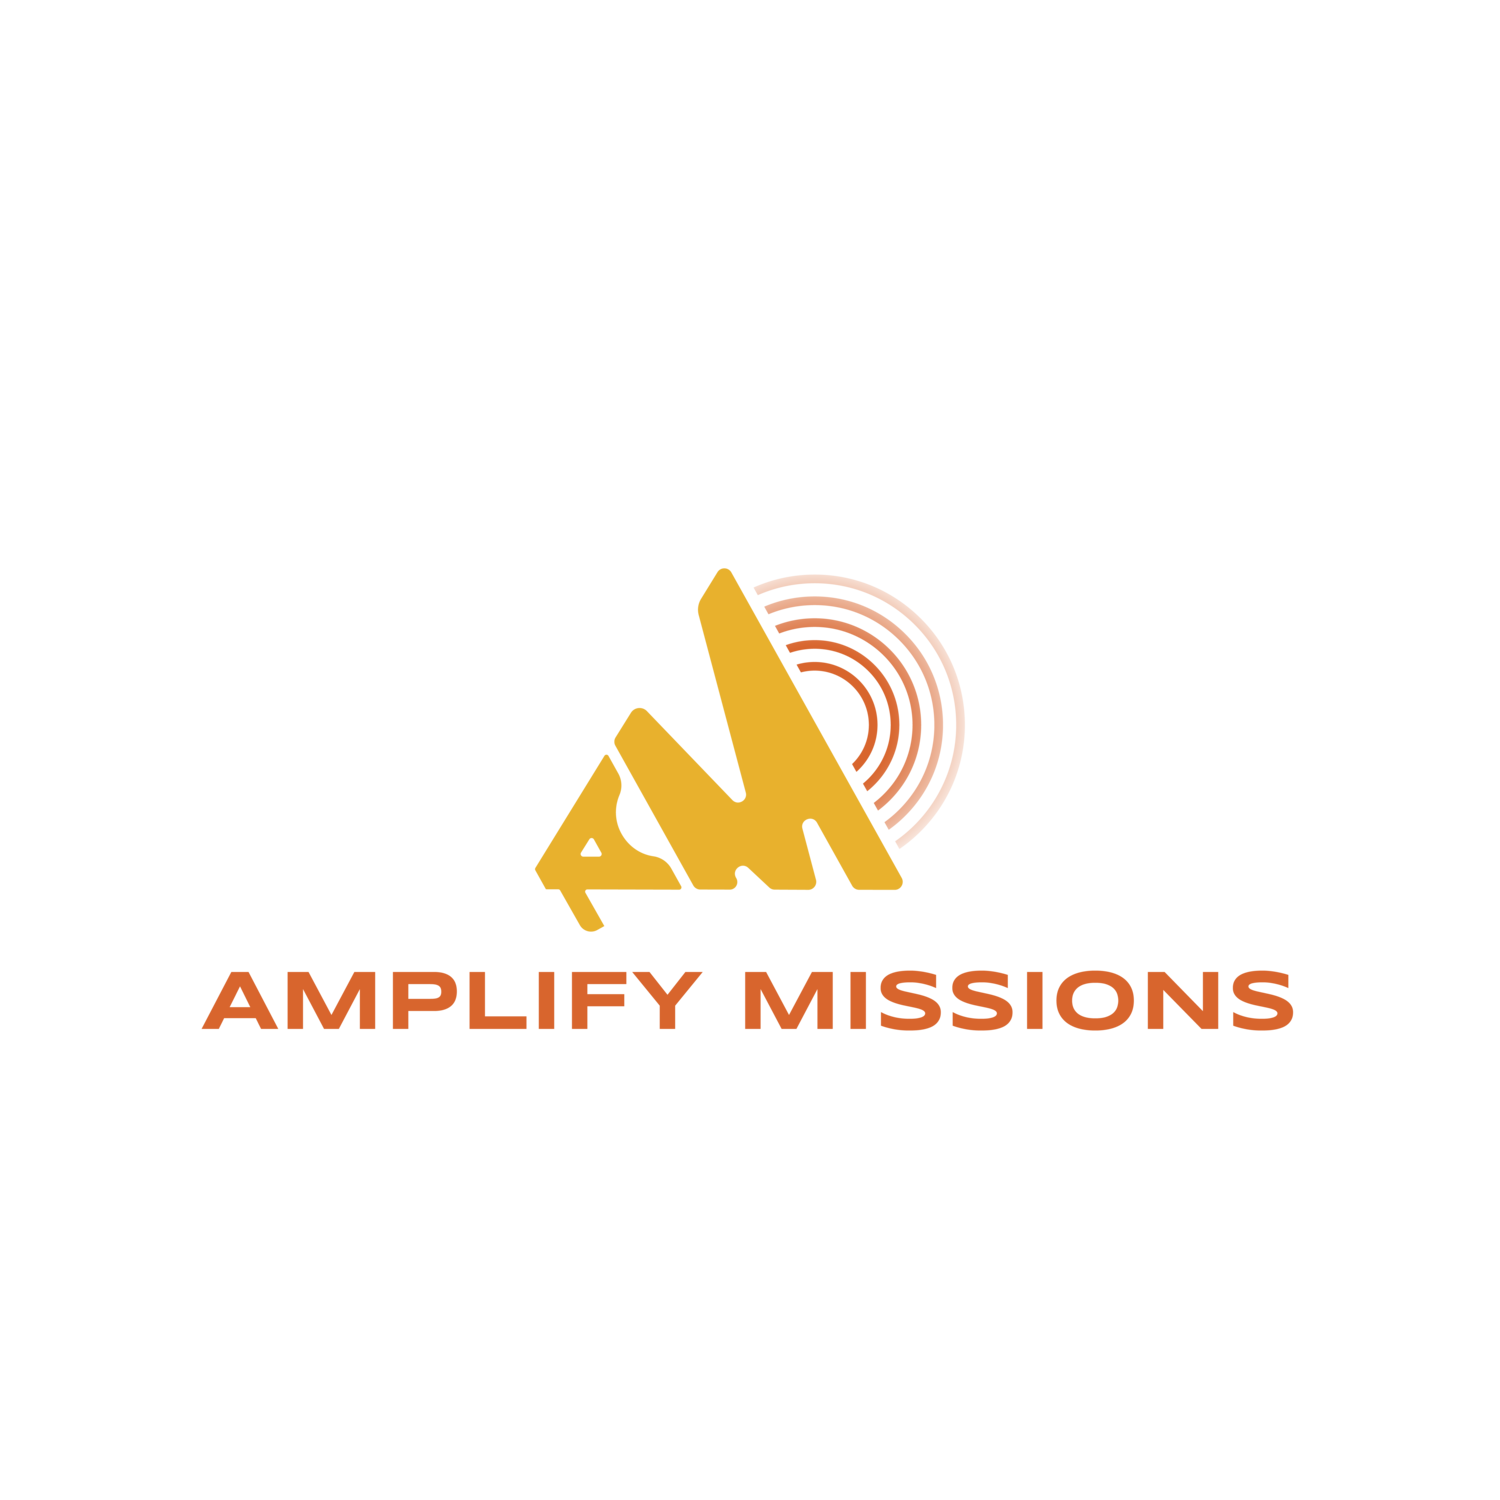 Amplify Missions